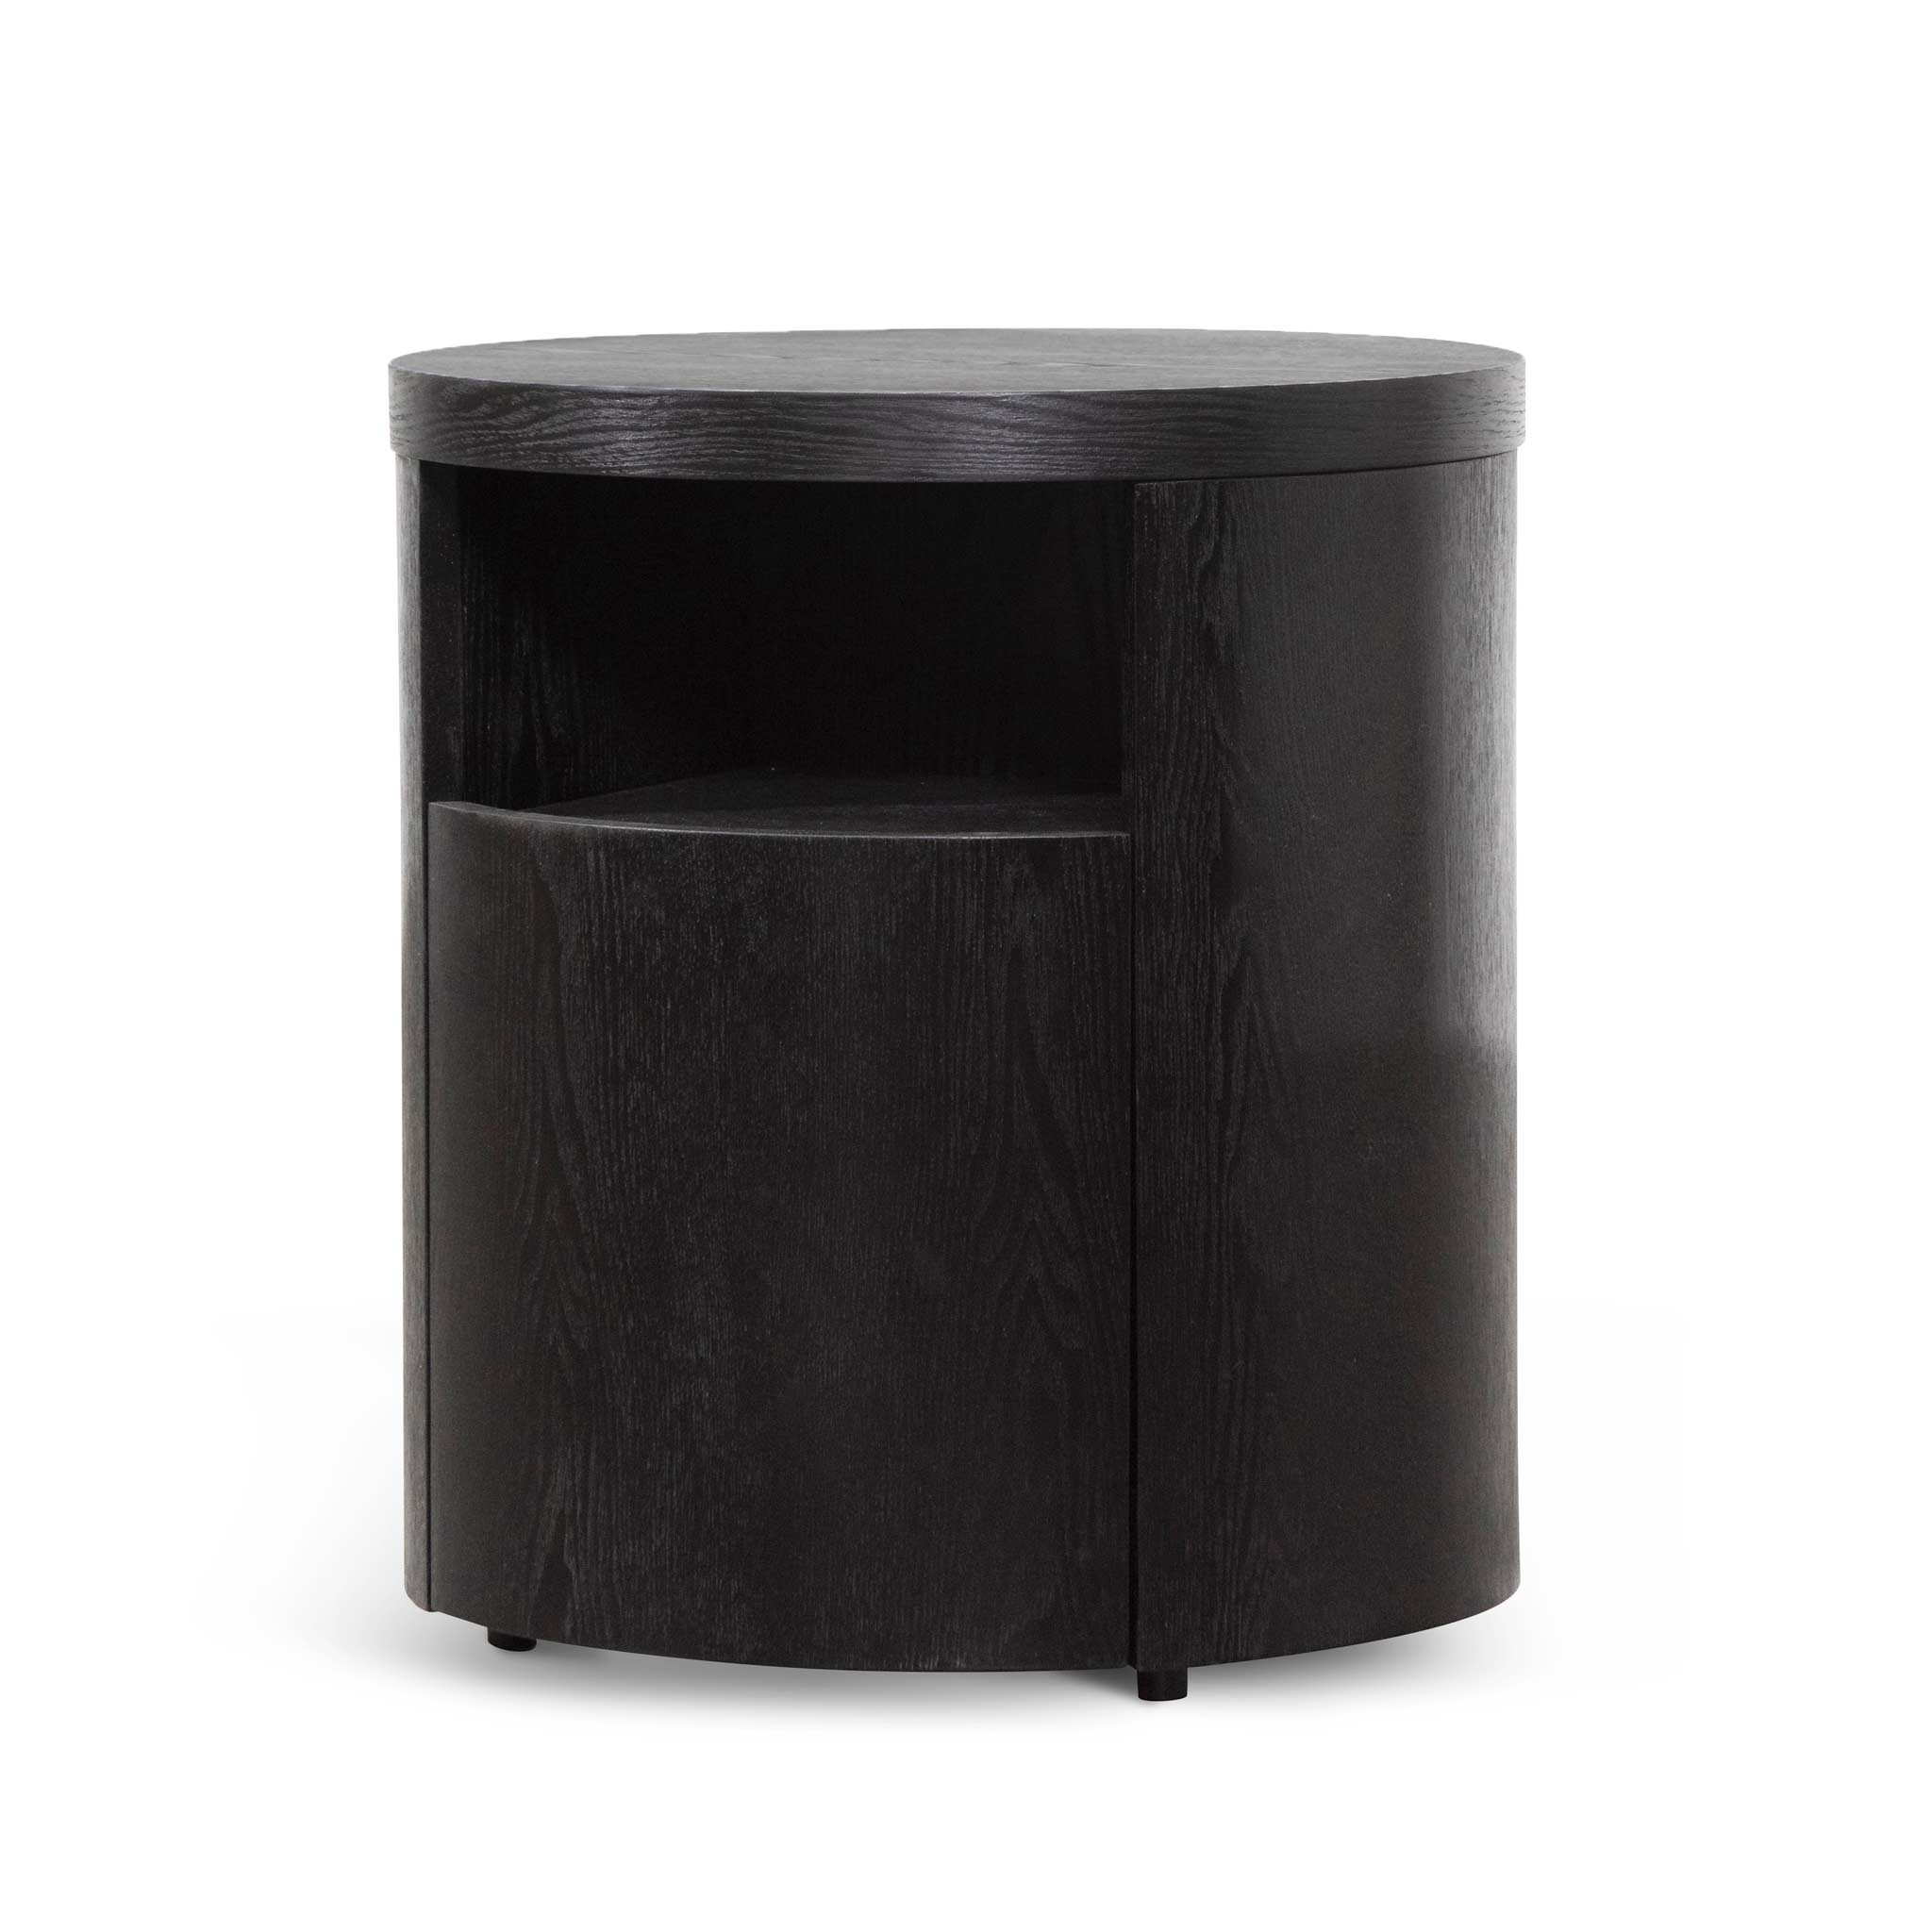 Amelia Round Wooden Bedside Table w/ Drawer - Black Mountain - Bedside Tables